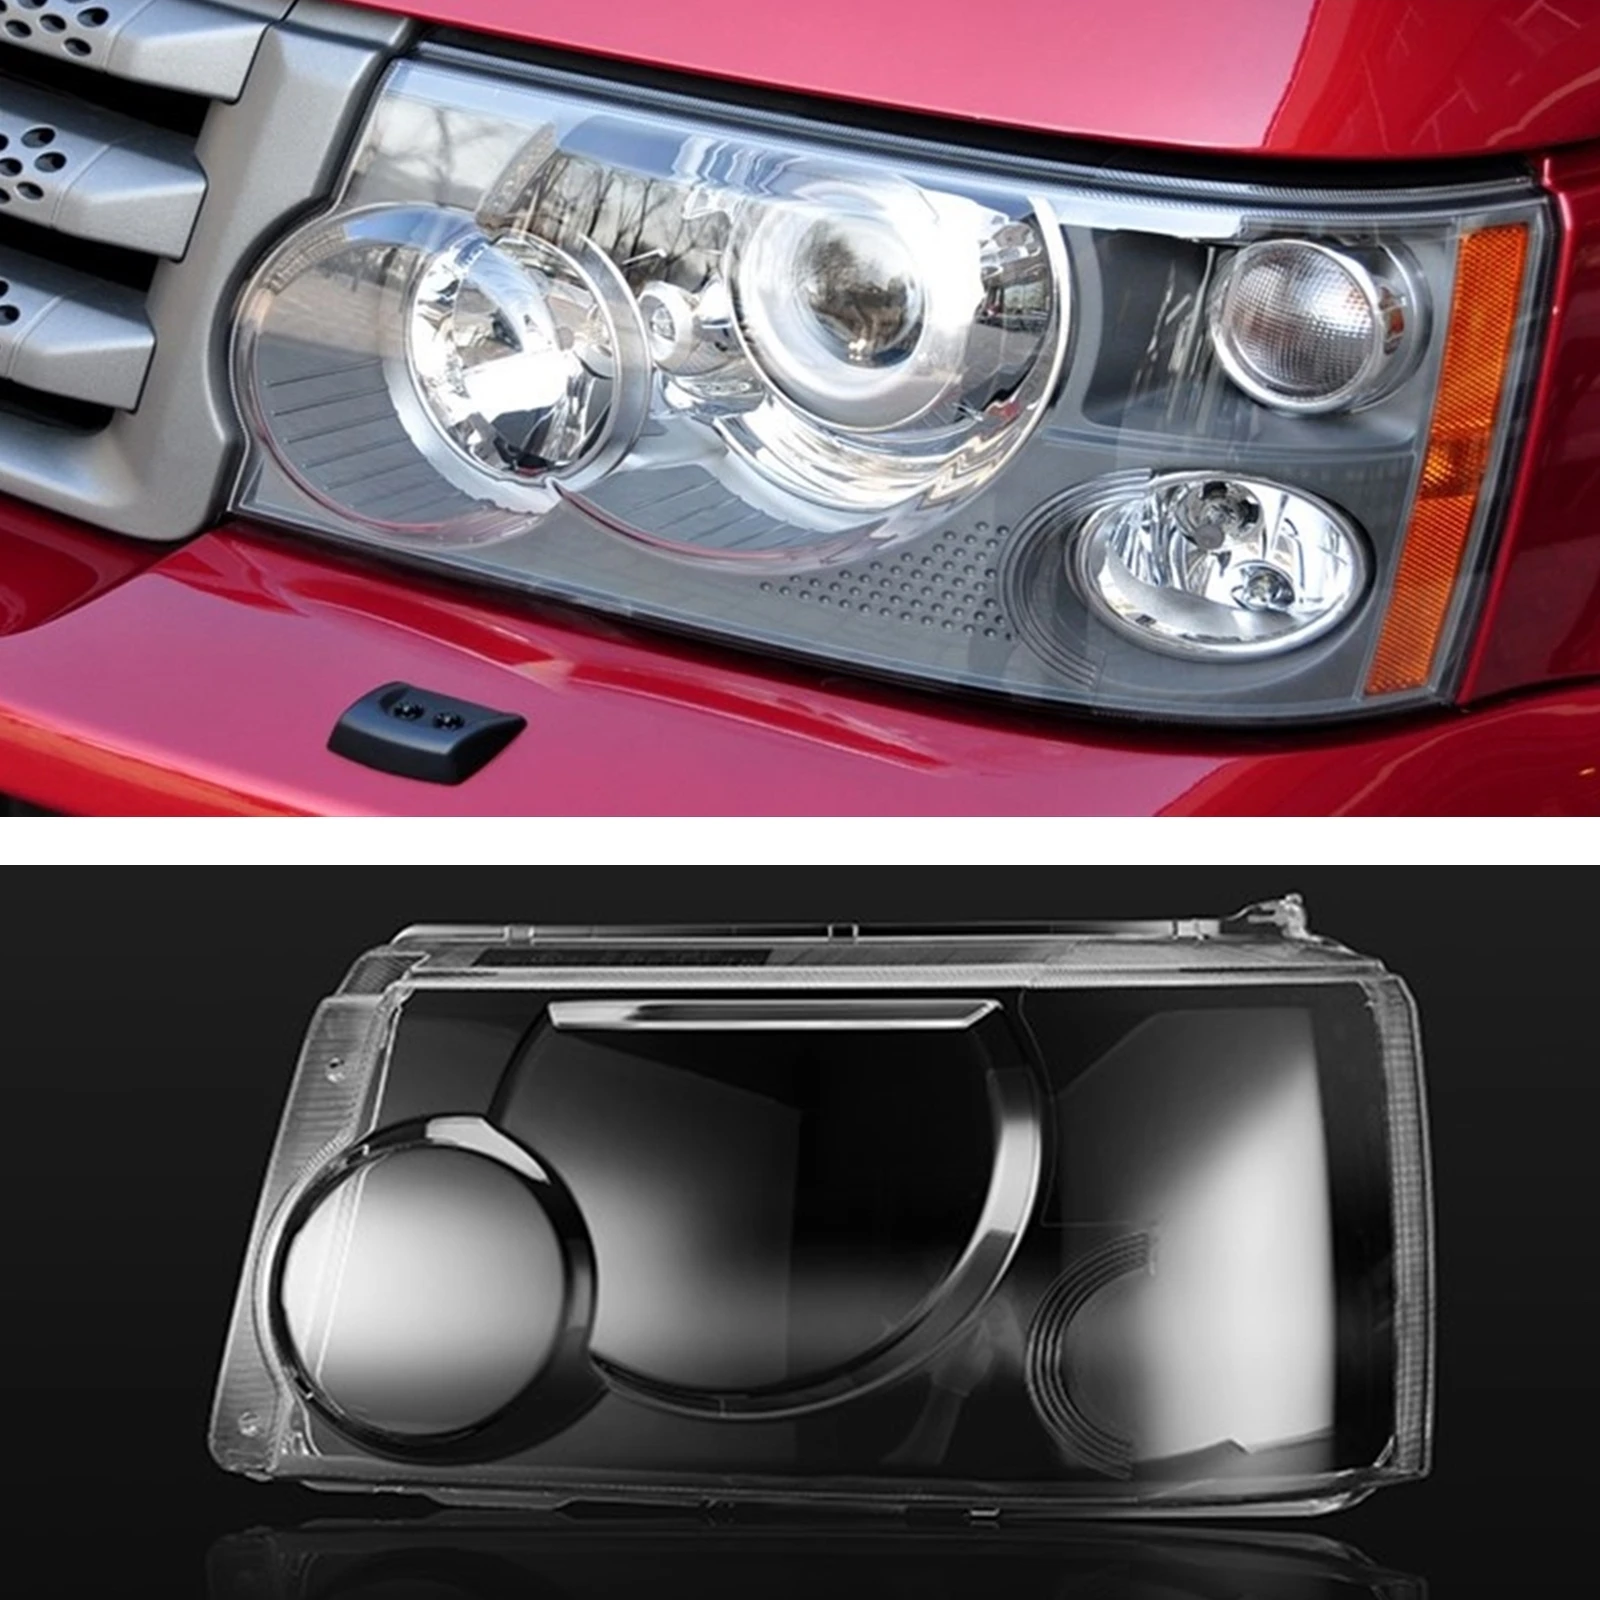 

1pc Headlight Lens Cover For Land Rover Range Rover Sport 2006-2009 Clear Car Front Head Light Lamp Cap Headlamp Shell Lampshade